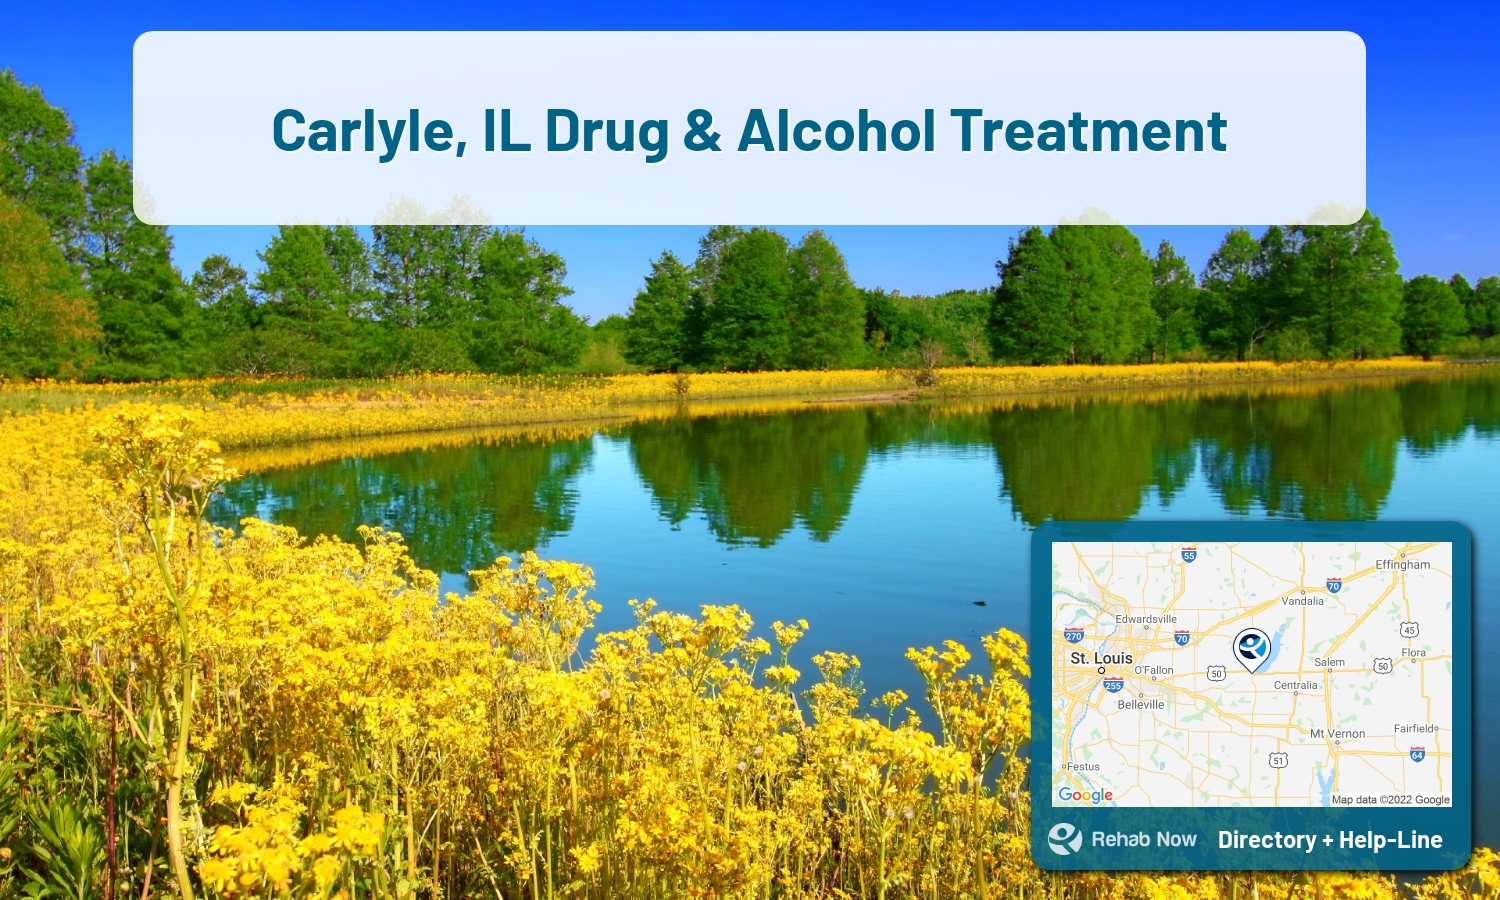 Drug rehab and alcohol treatment services nearby Carlyle, IL. Need help choosing a treatment program? Call our free hotline!